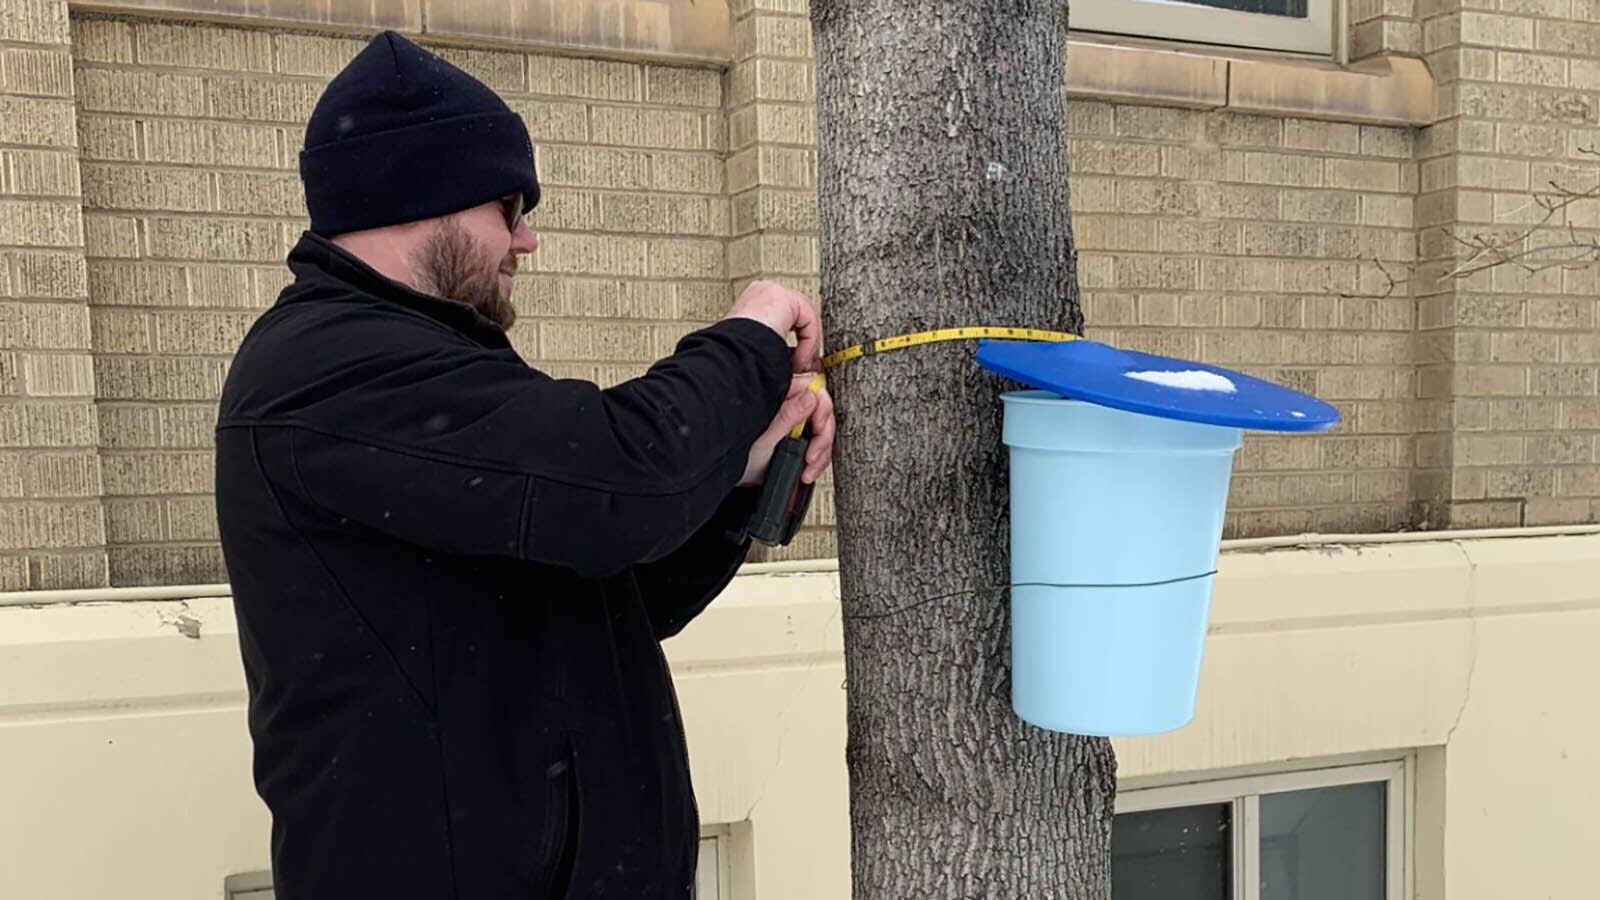 Box elder trees in urban and rural settings are all fair game to be tapped for sap to make syrup.